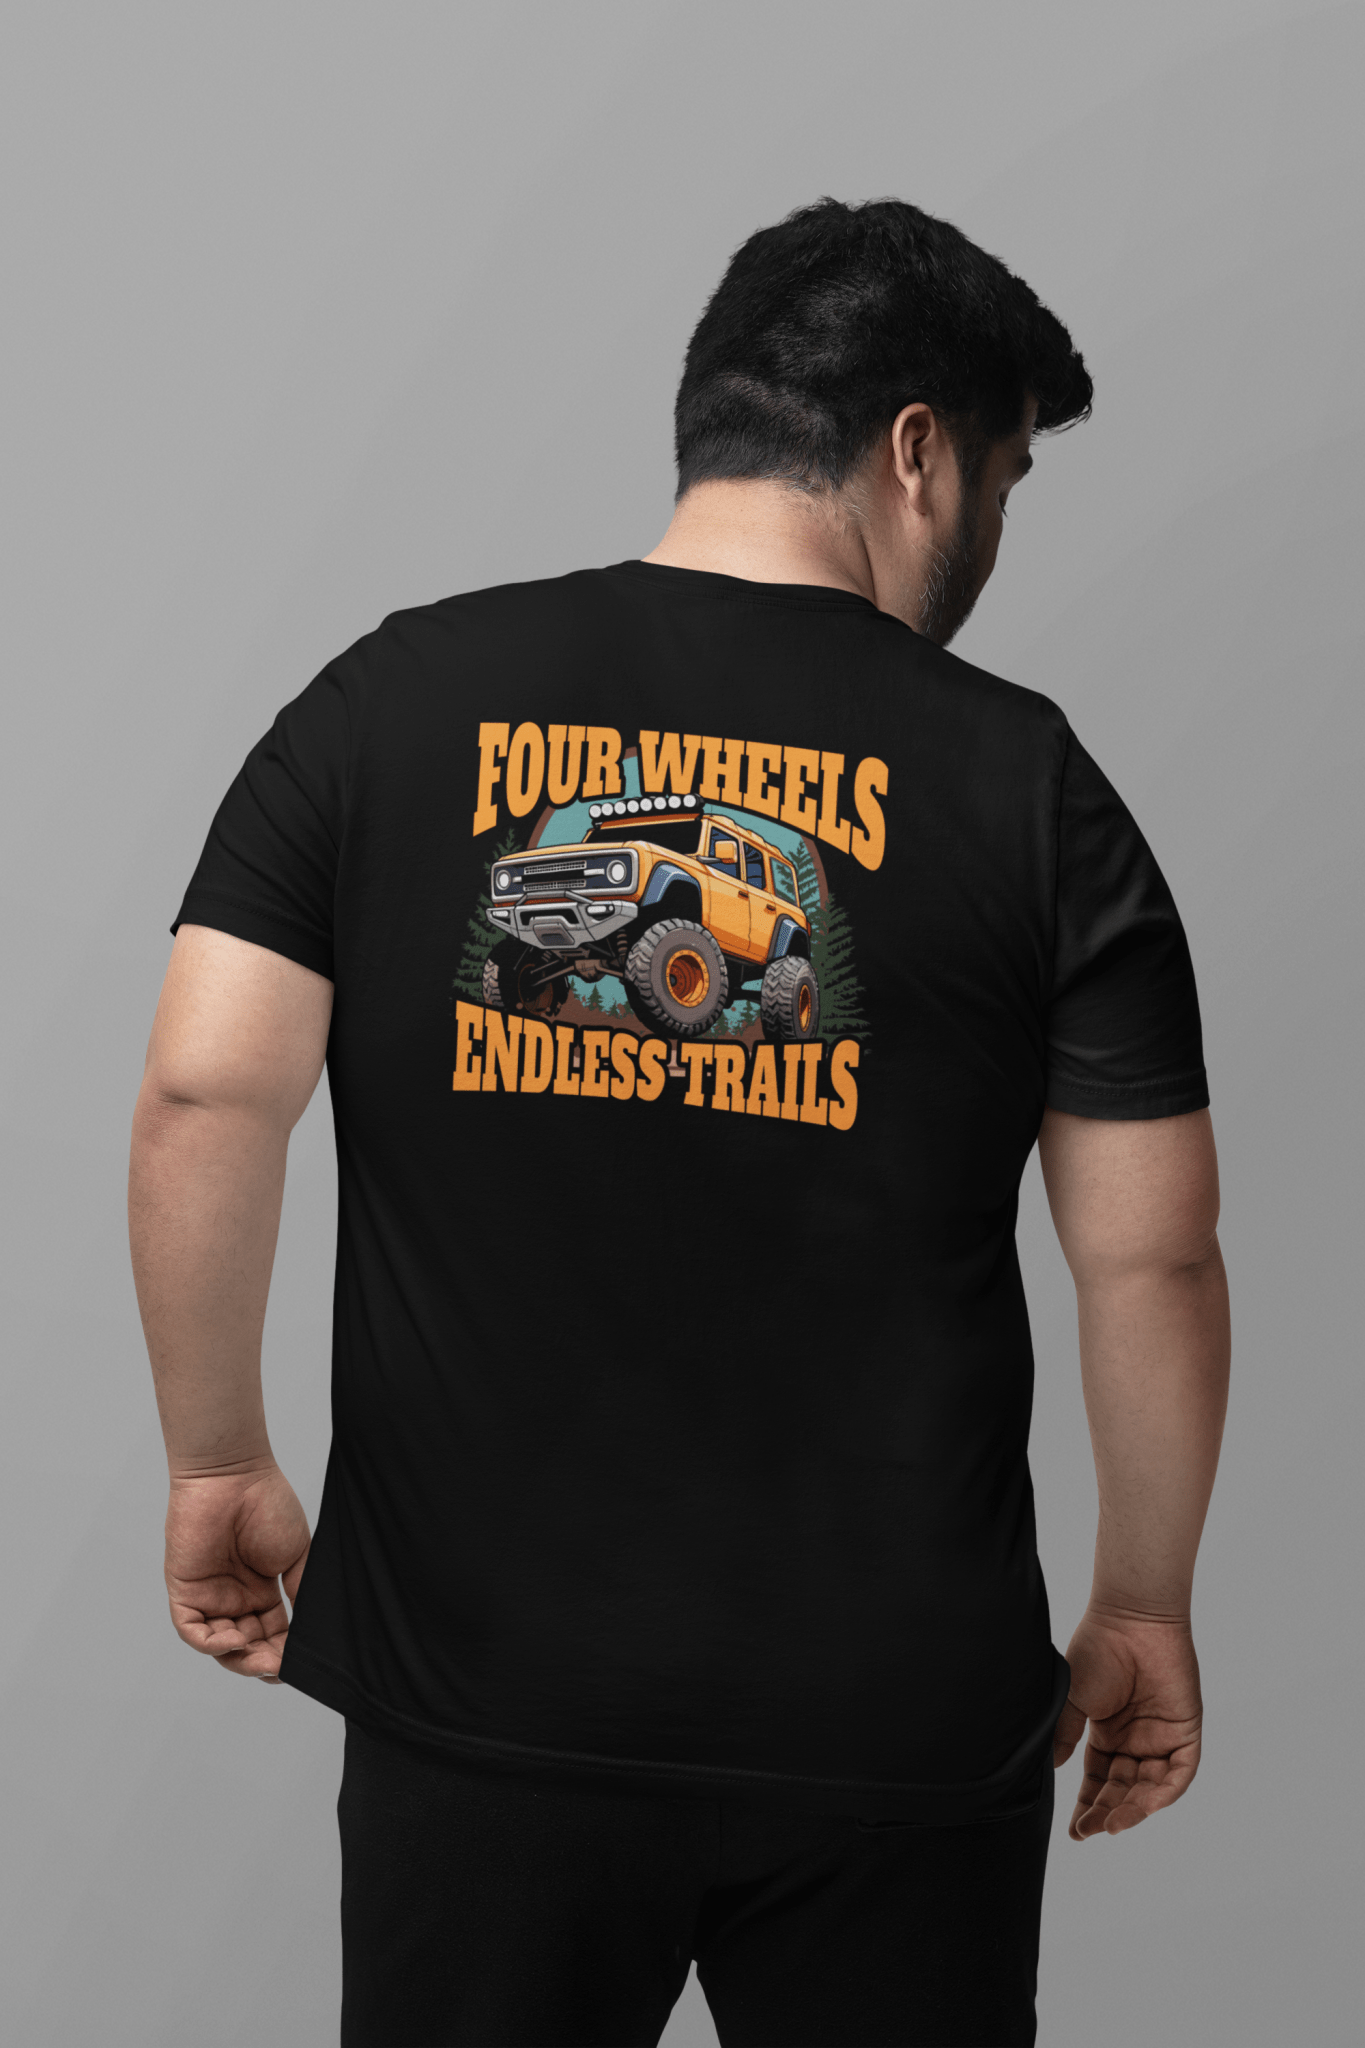 Endless Trails-4x4 Offroad Tee Shirt - Goats Trail Off-Road Apparel Company